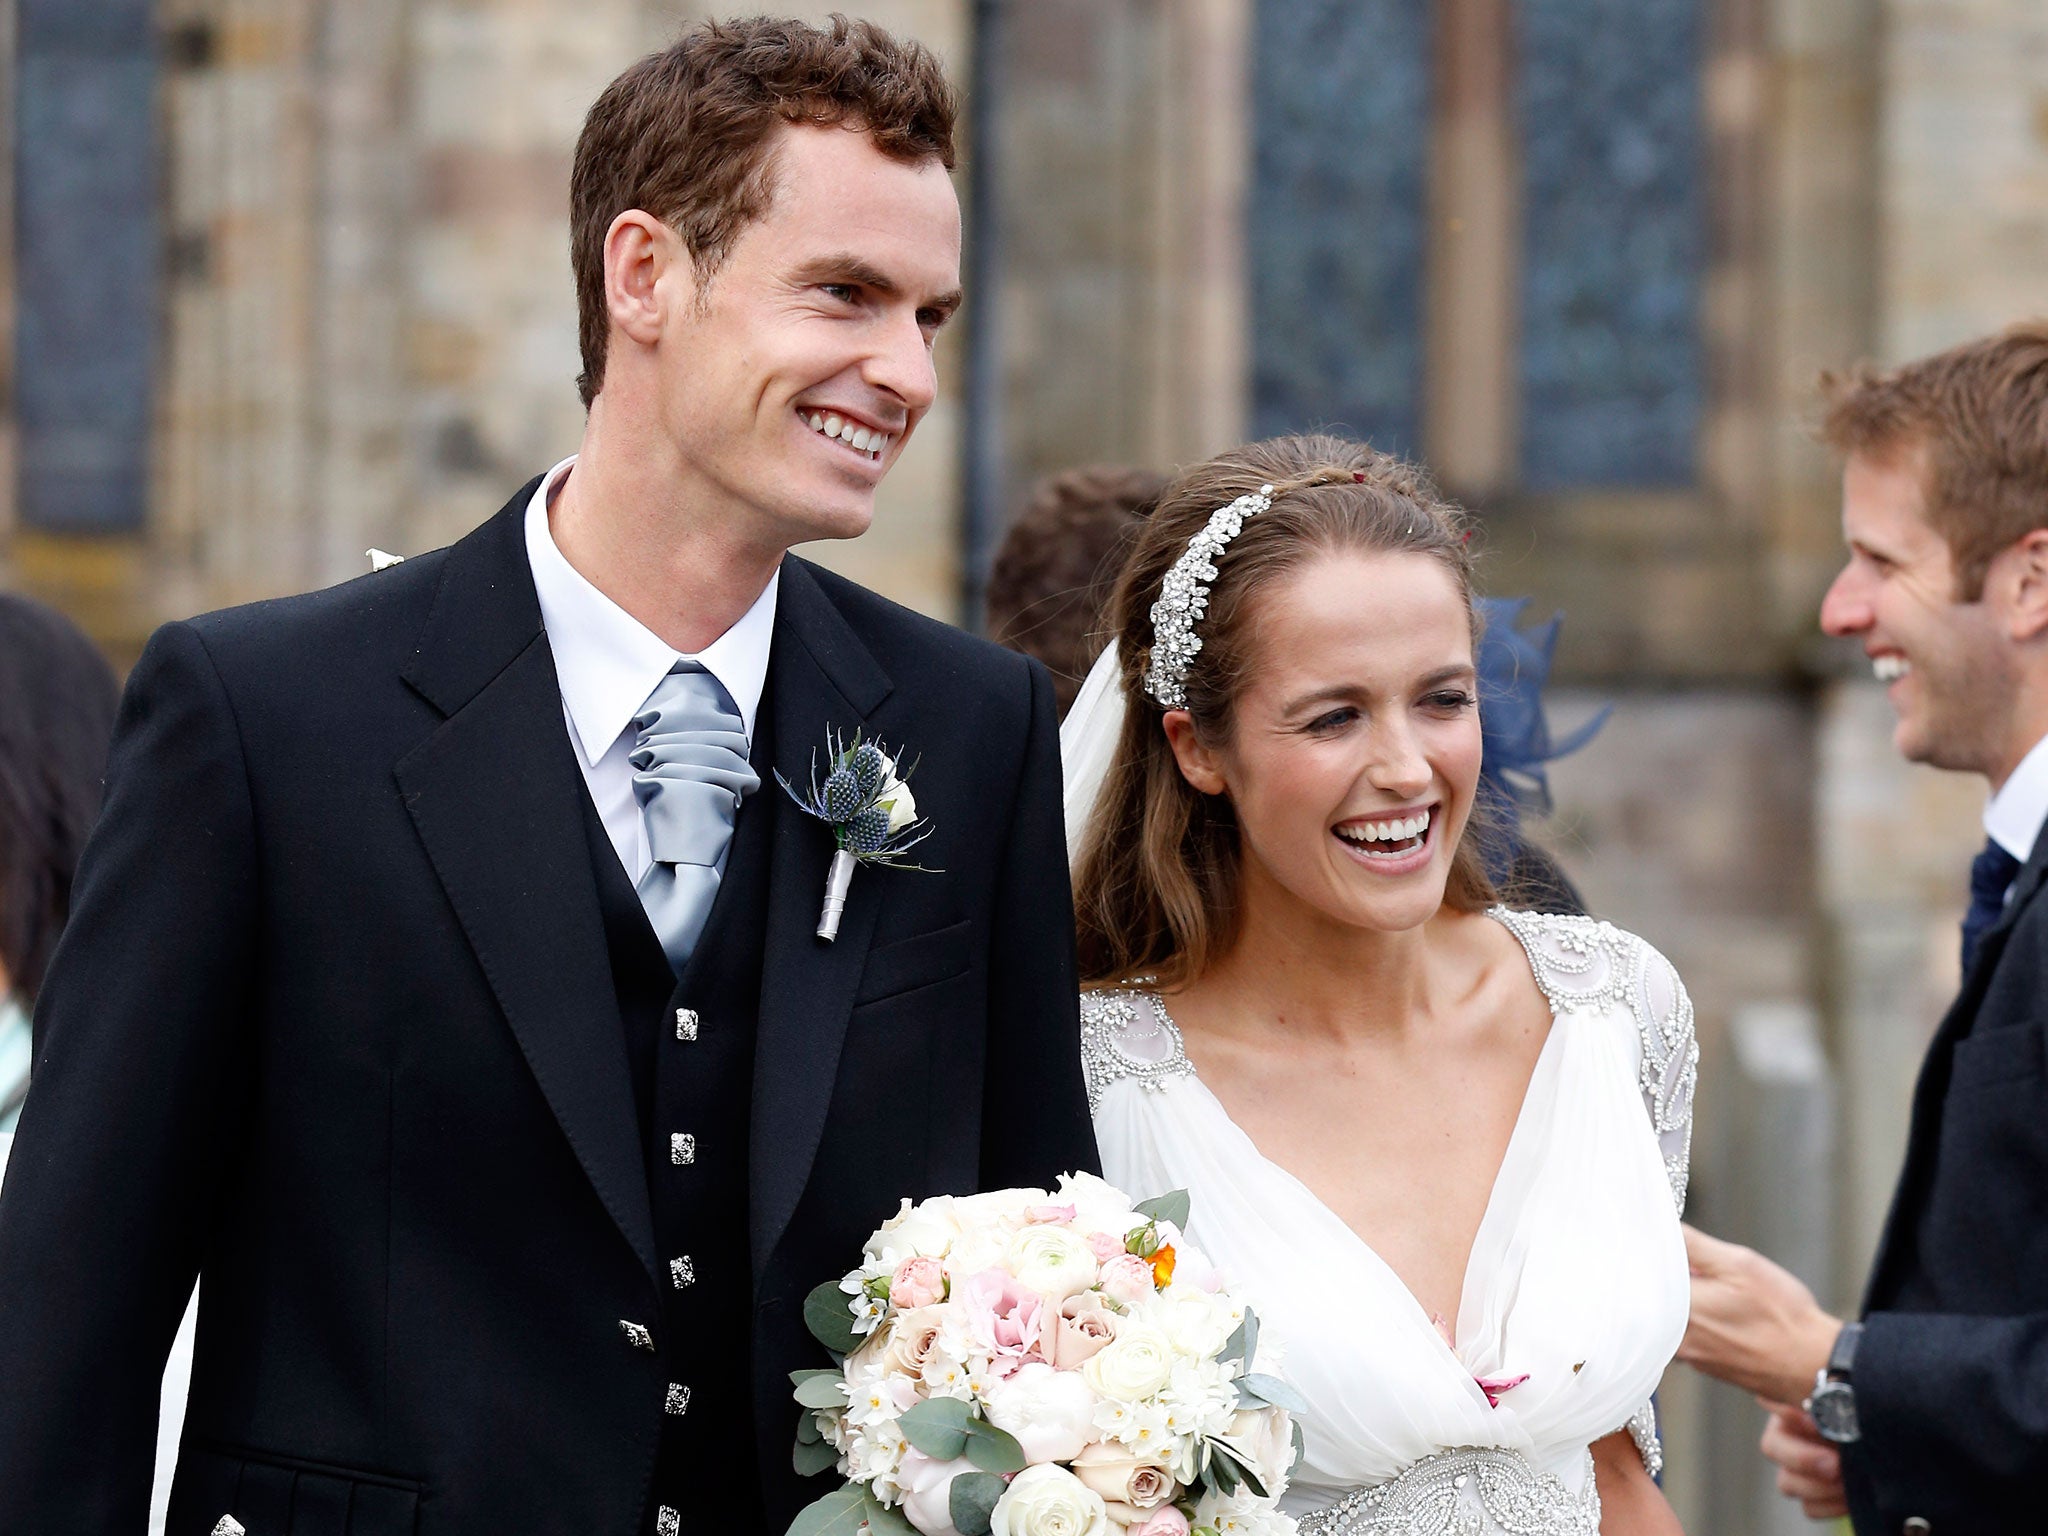 Andy Murray and Kim Sears married on Saturday 11 April